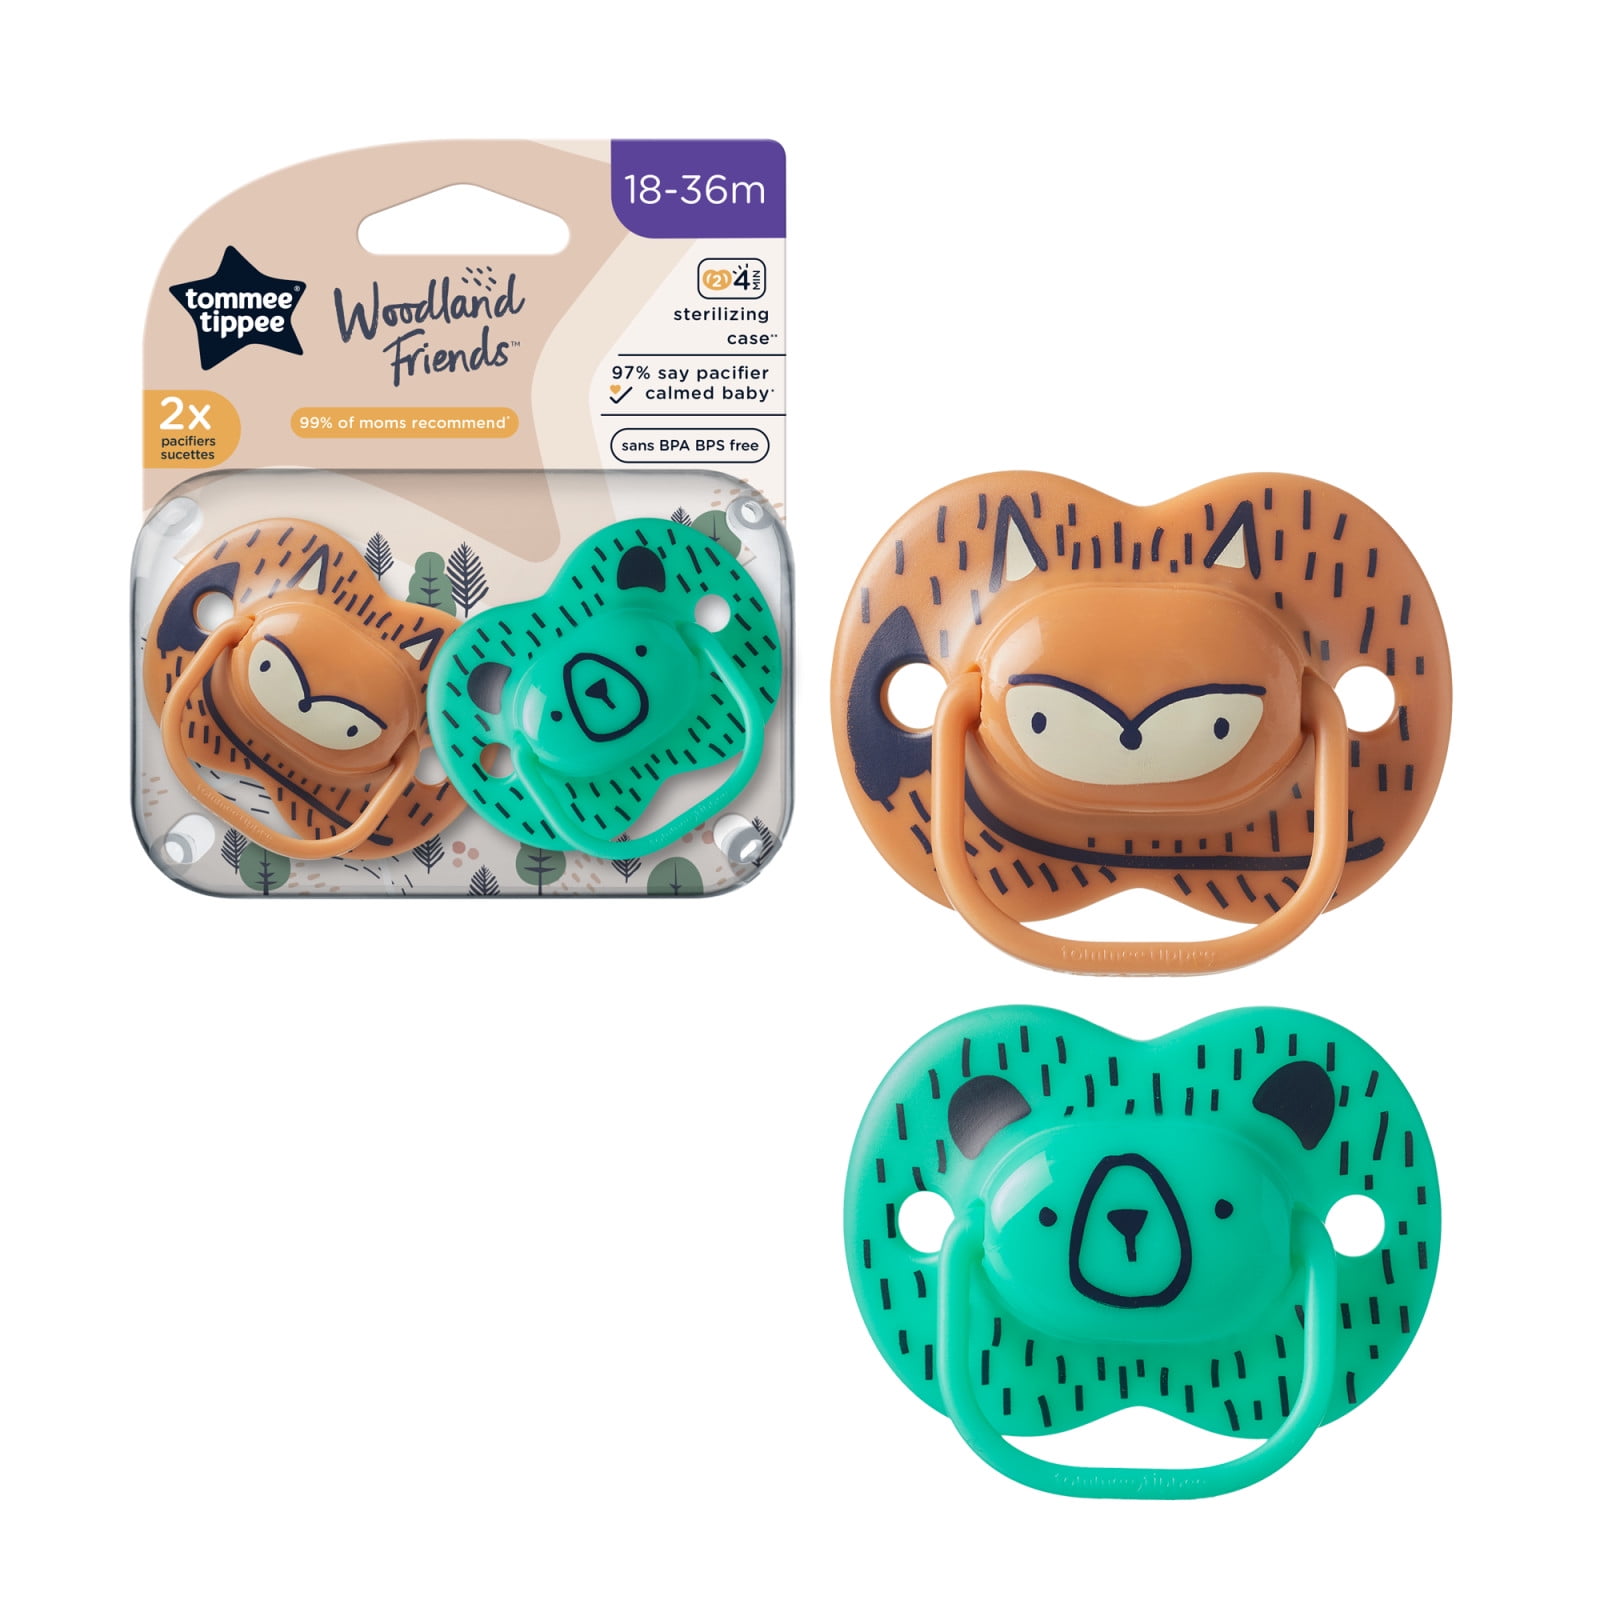 Pack de 2 sucettes Fun style 18-36 mois Bleu - Tommee Tippee